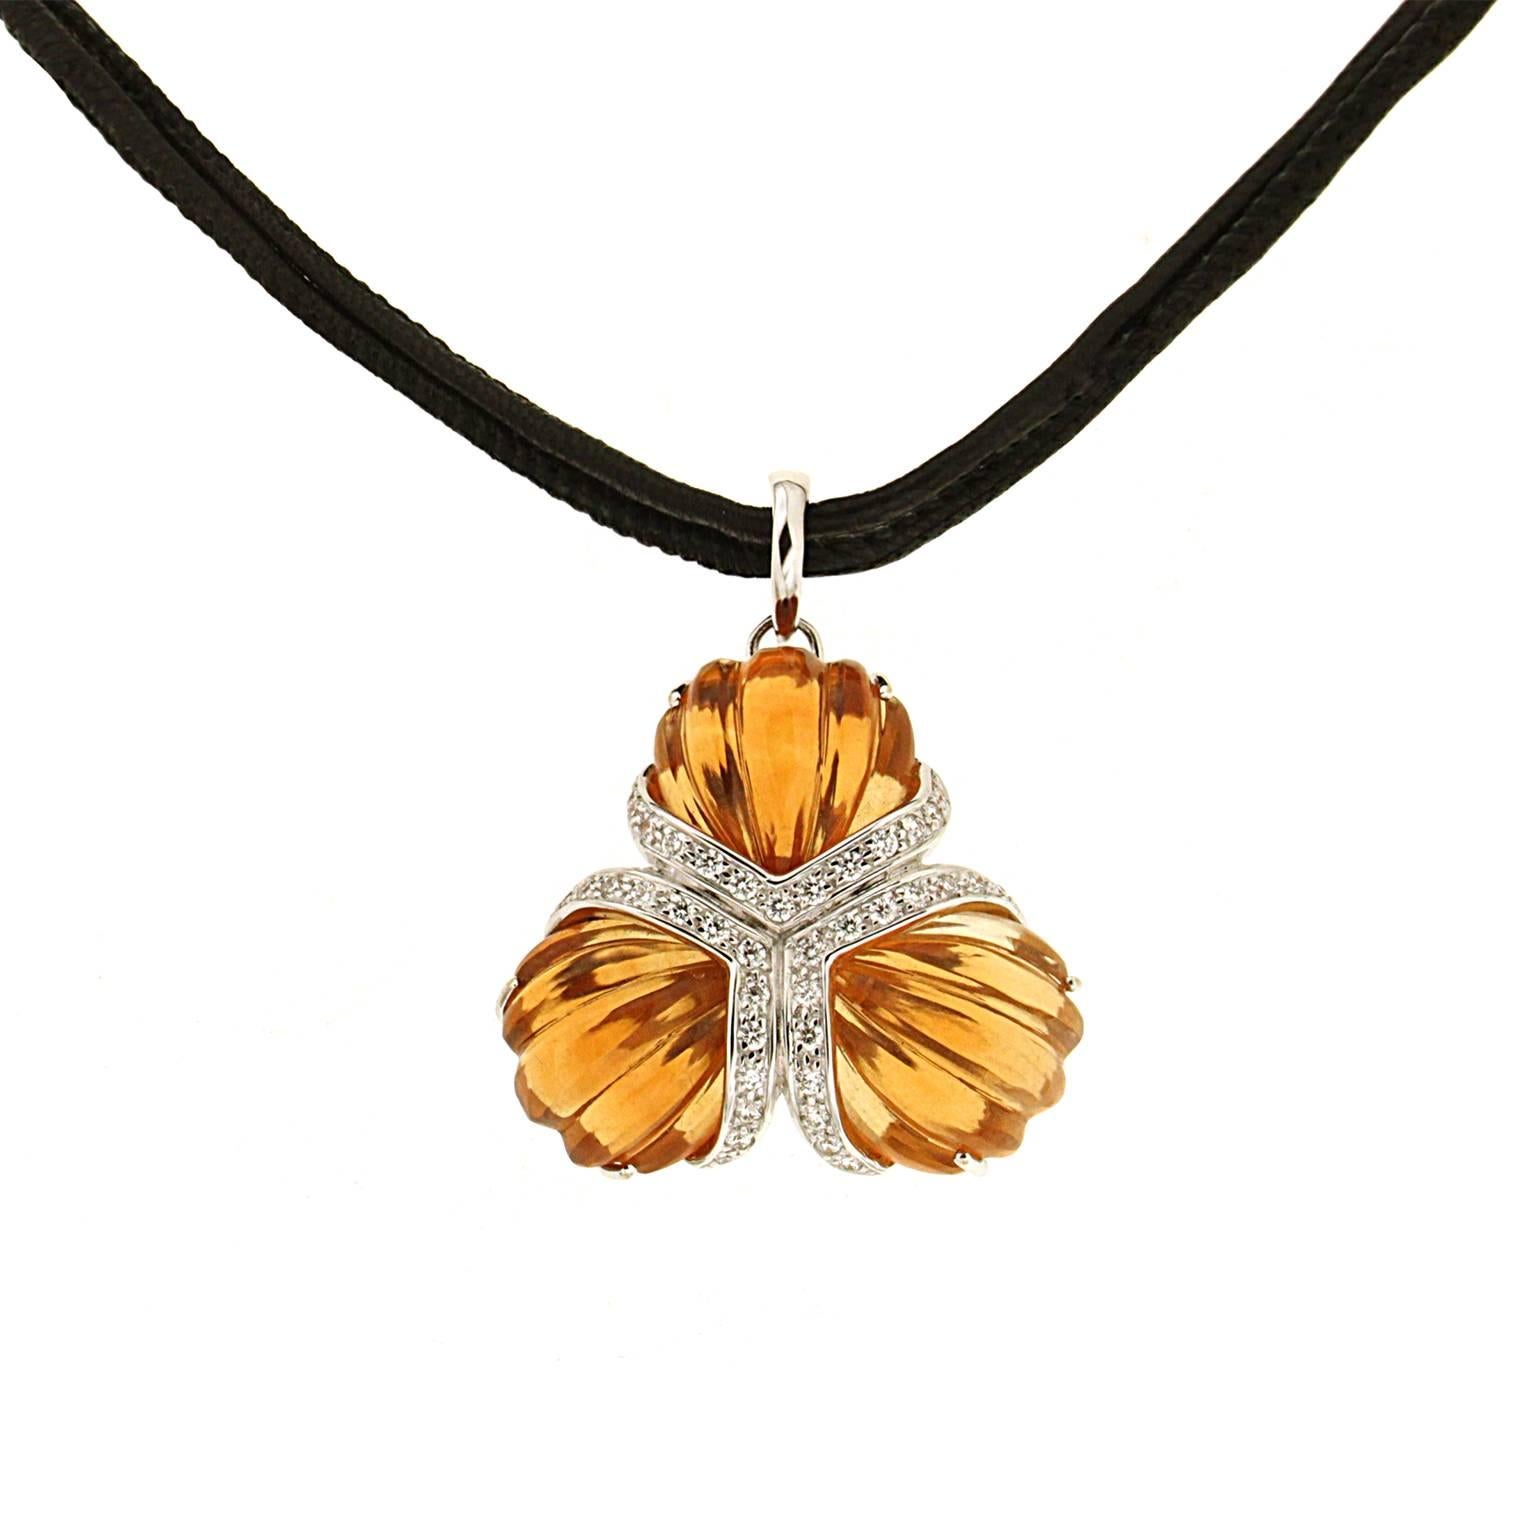 A fan motif is formed by three citrines carved into tapering ridges. They meet at their narrowest points, where the lower edge of each gem is adorned with round brilliant cut diamonds set in 18k white gold. The pendant measures 1.57 inches (length)